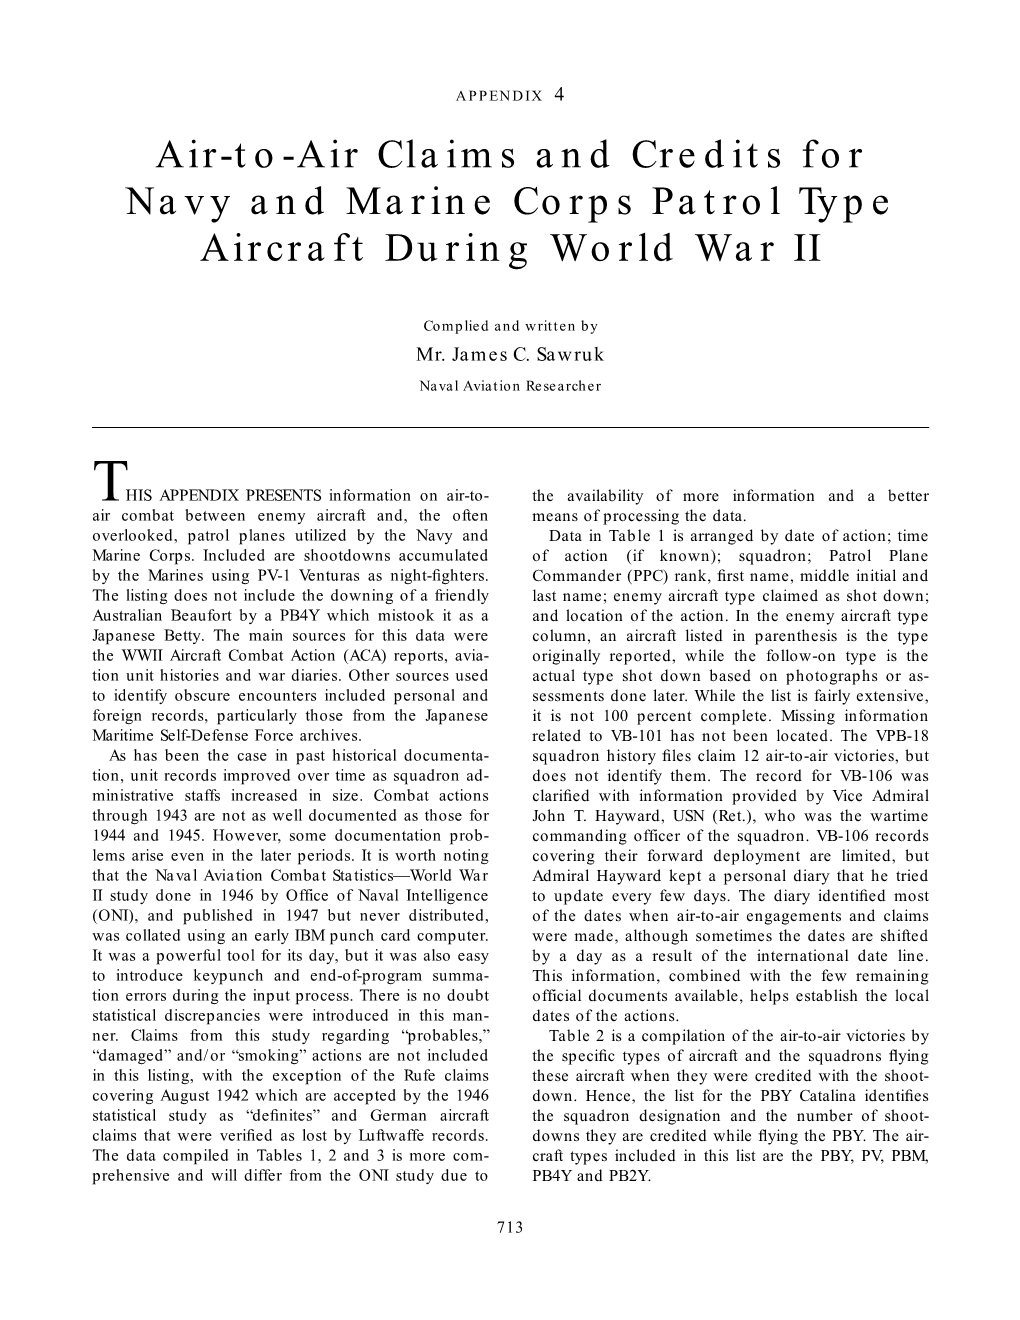 Appendix 4: Air to Air Claims and Credits for Navy and Marine Corps Patrol Type Aircraft